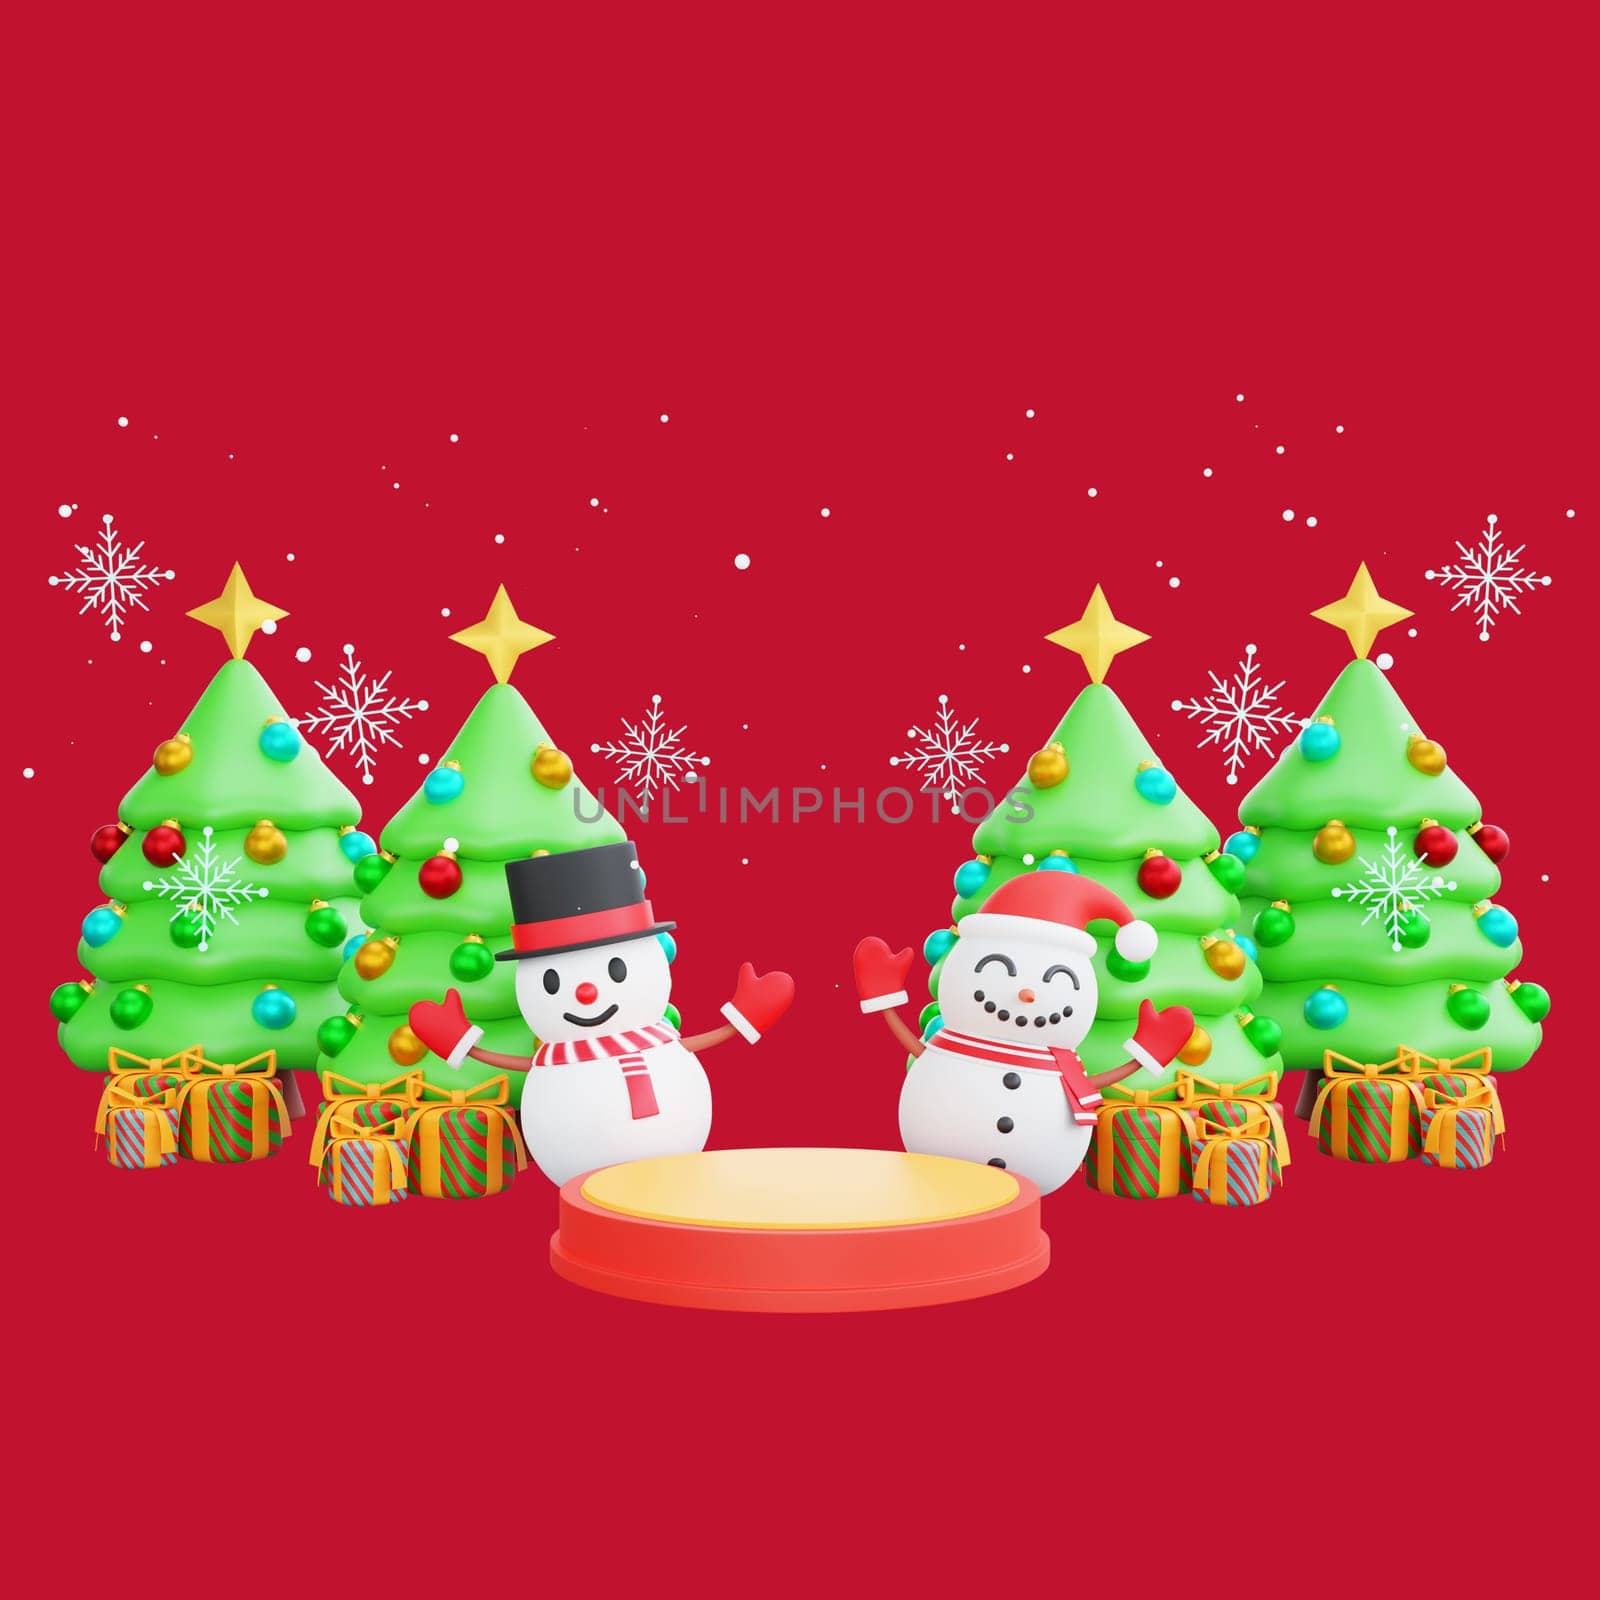 3D illustration of a podium with two jolly snowman alongside beautifully decorated Christmas trees and colorful presents. Perfect for Christmas and Happy New Year celebrations